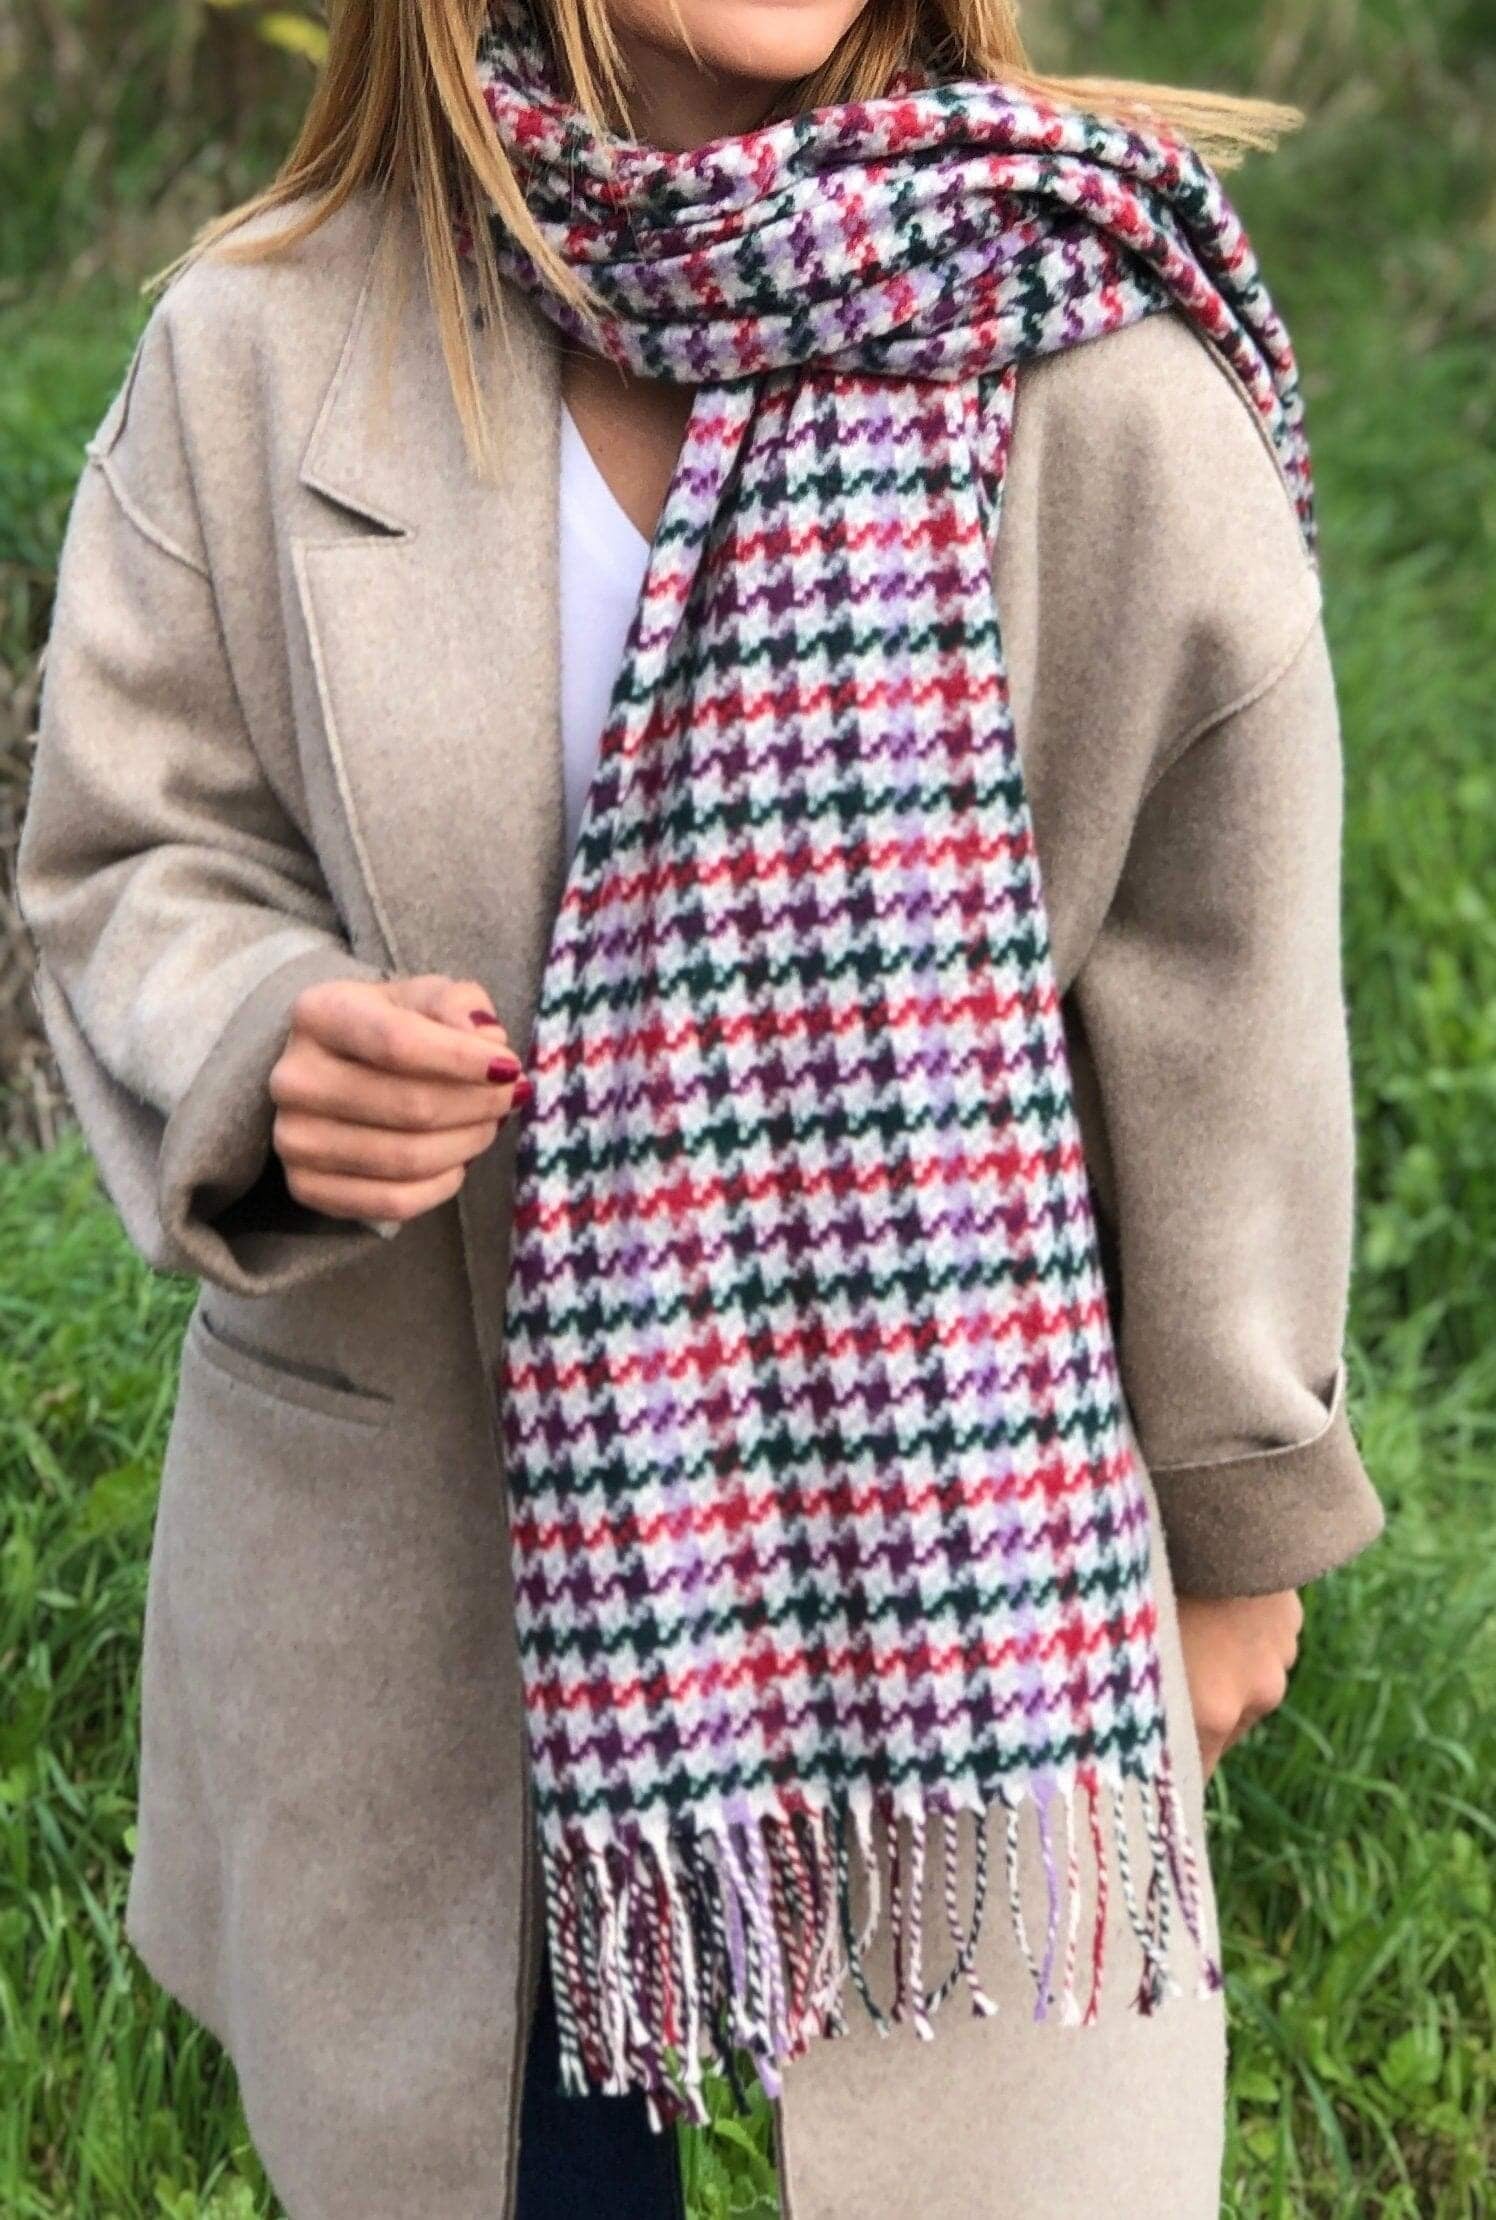 Stay warm and stylish with this Long Wool Striped Woven Shawl in purple, white, and green